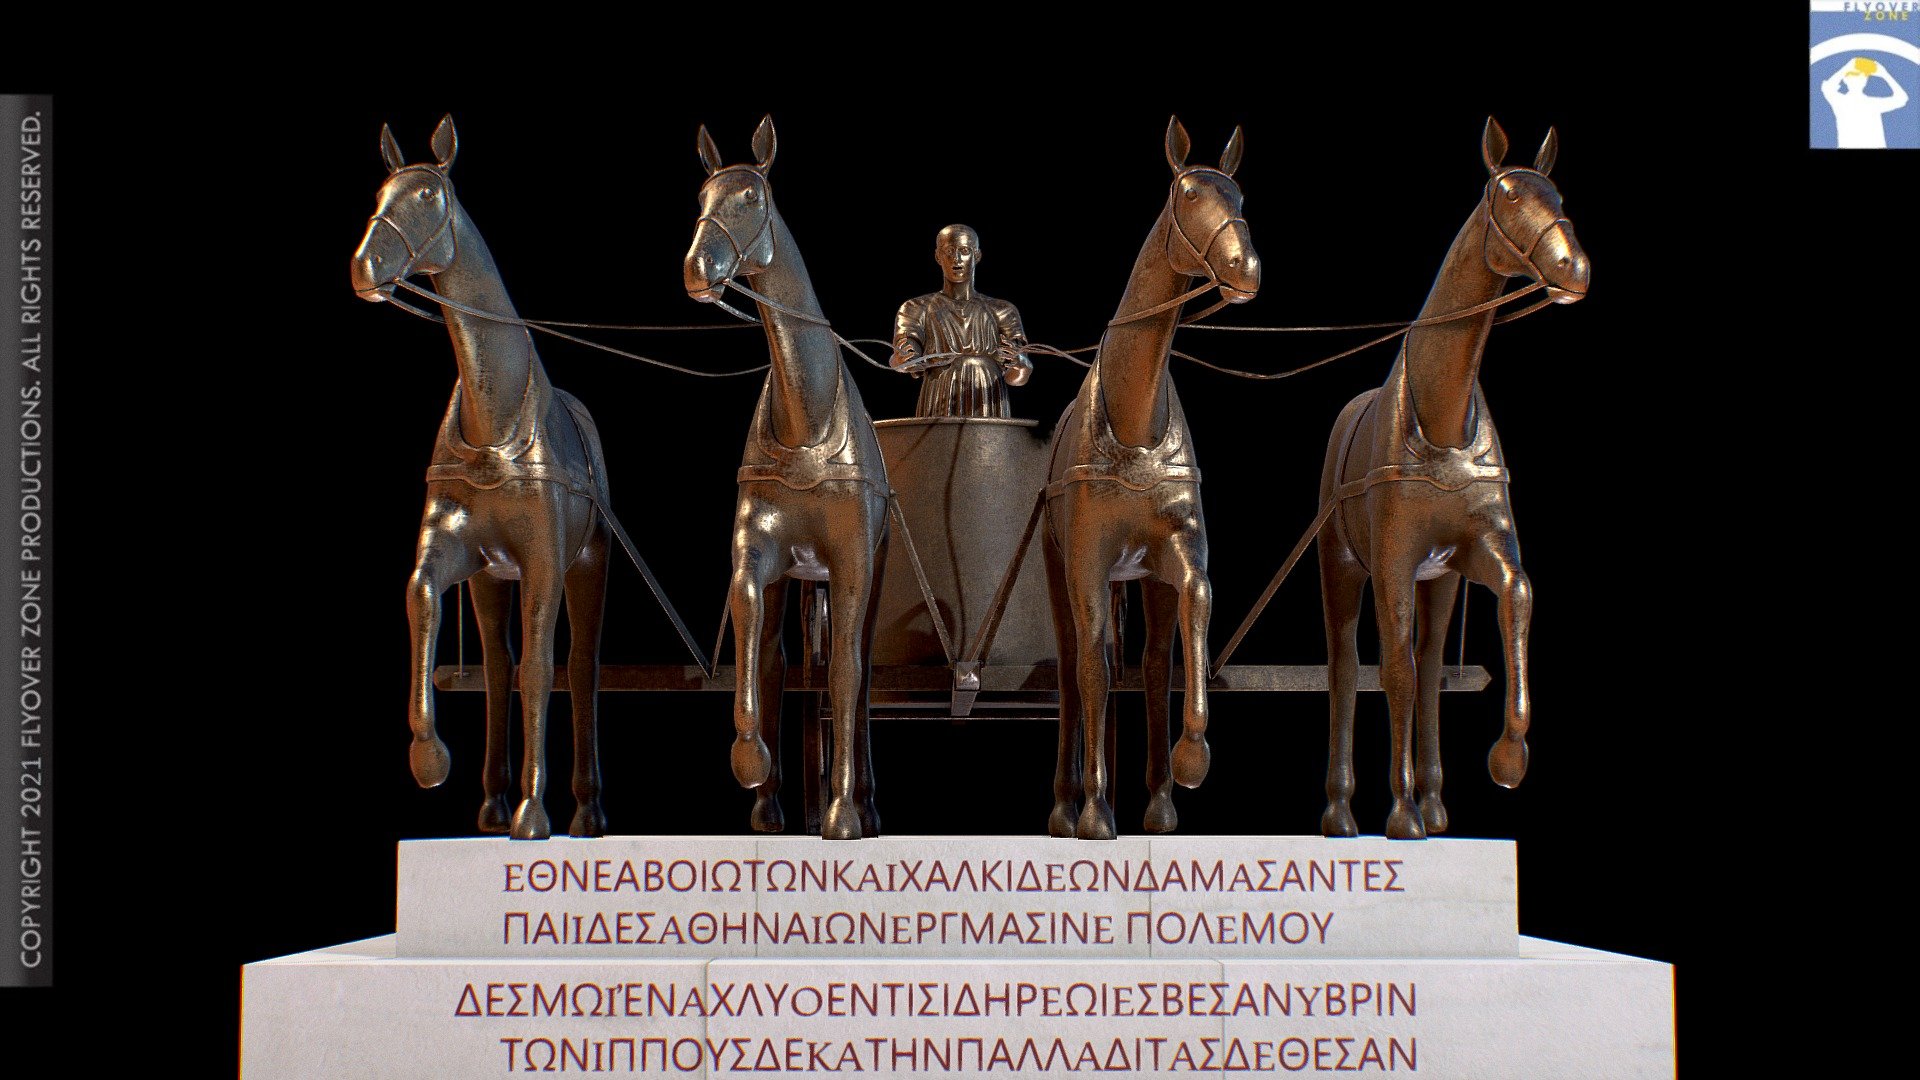 Name: Quadriga (reconstruction)
Material: Digital
Format: Statue Group
Location: The lost original was erected on the Acropolis, Athens, near the colossal statue of Athena Promachos, as per Gorham Phillips Stevens, The Periclean Entrance Court of the Acropolis of Athens, Hesperia 5.4 (1936) 443-520 at pp. 504-506 with figures 42 (2) and 54 for the location and design.  
Restorer: Mohamed Abdelaziz
Copyright 2022 Flyover Zone, Inc. All rights reserved.
 - Quadriga (reconstruction) - 3D model by Flyover Zone (@FlyoverZone) 3d model